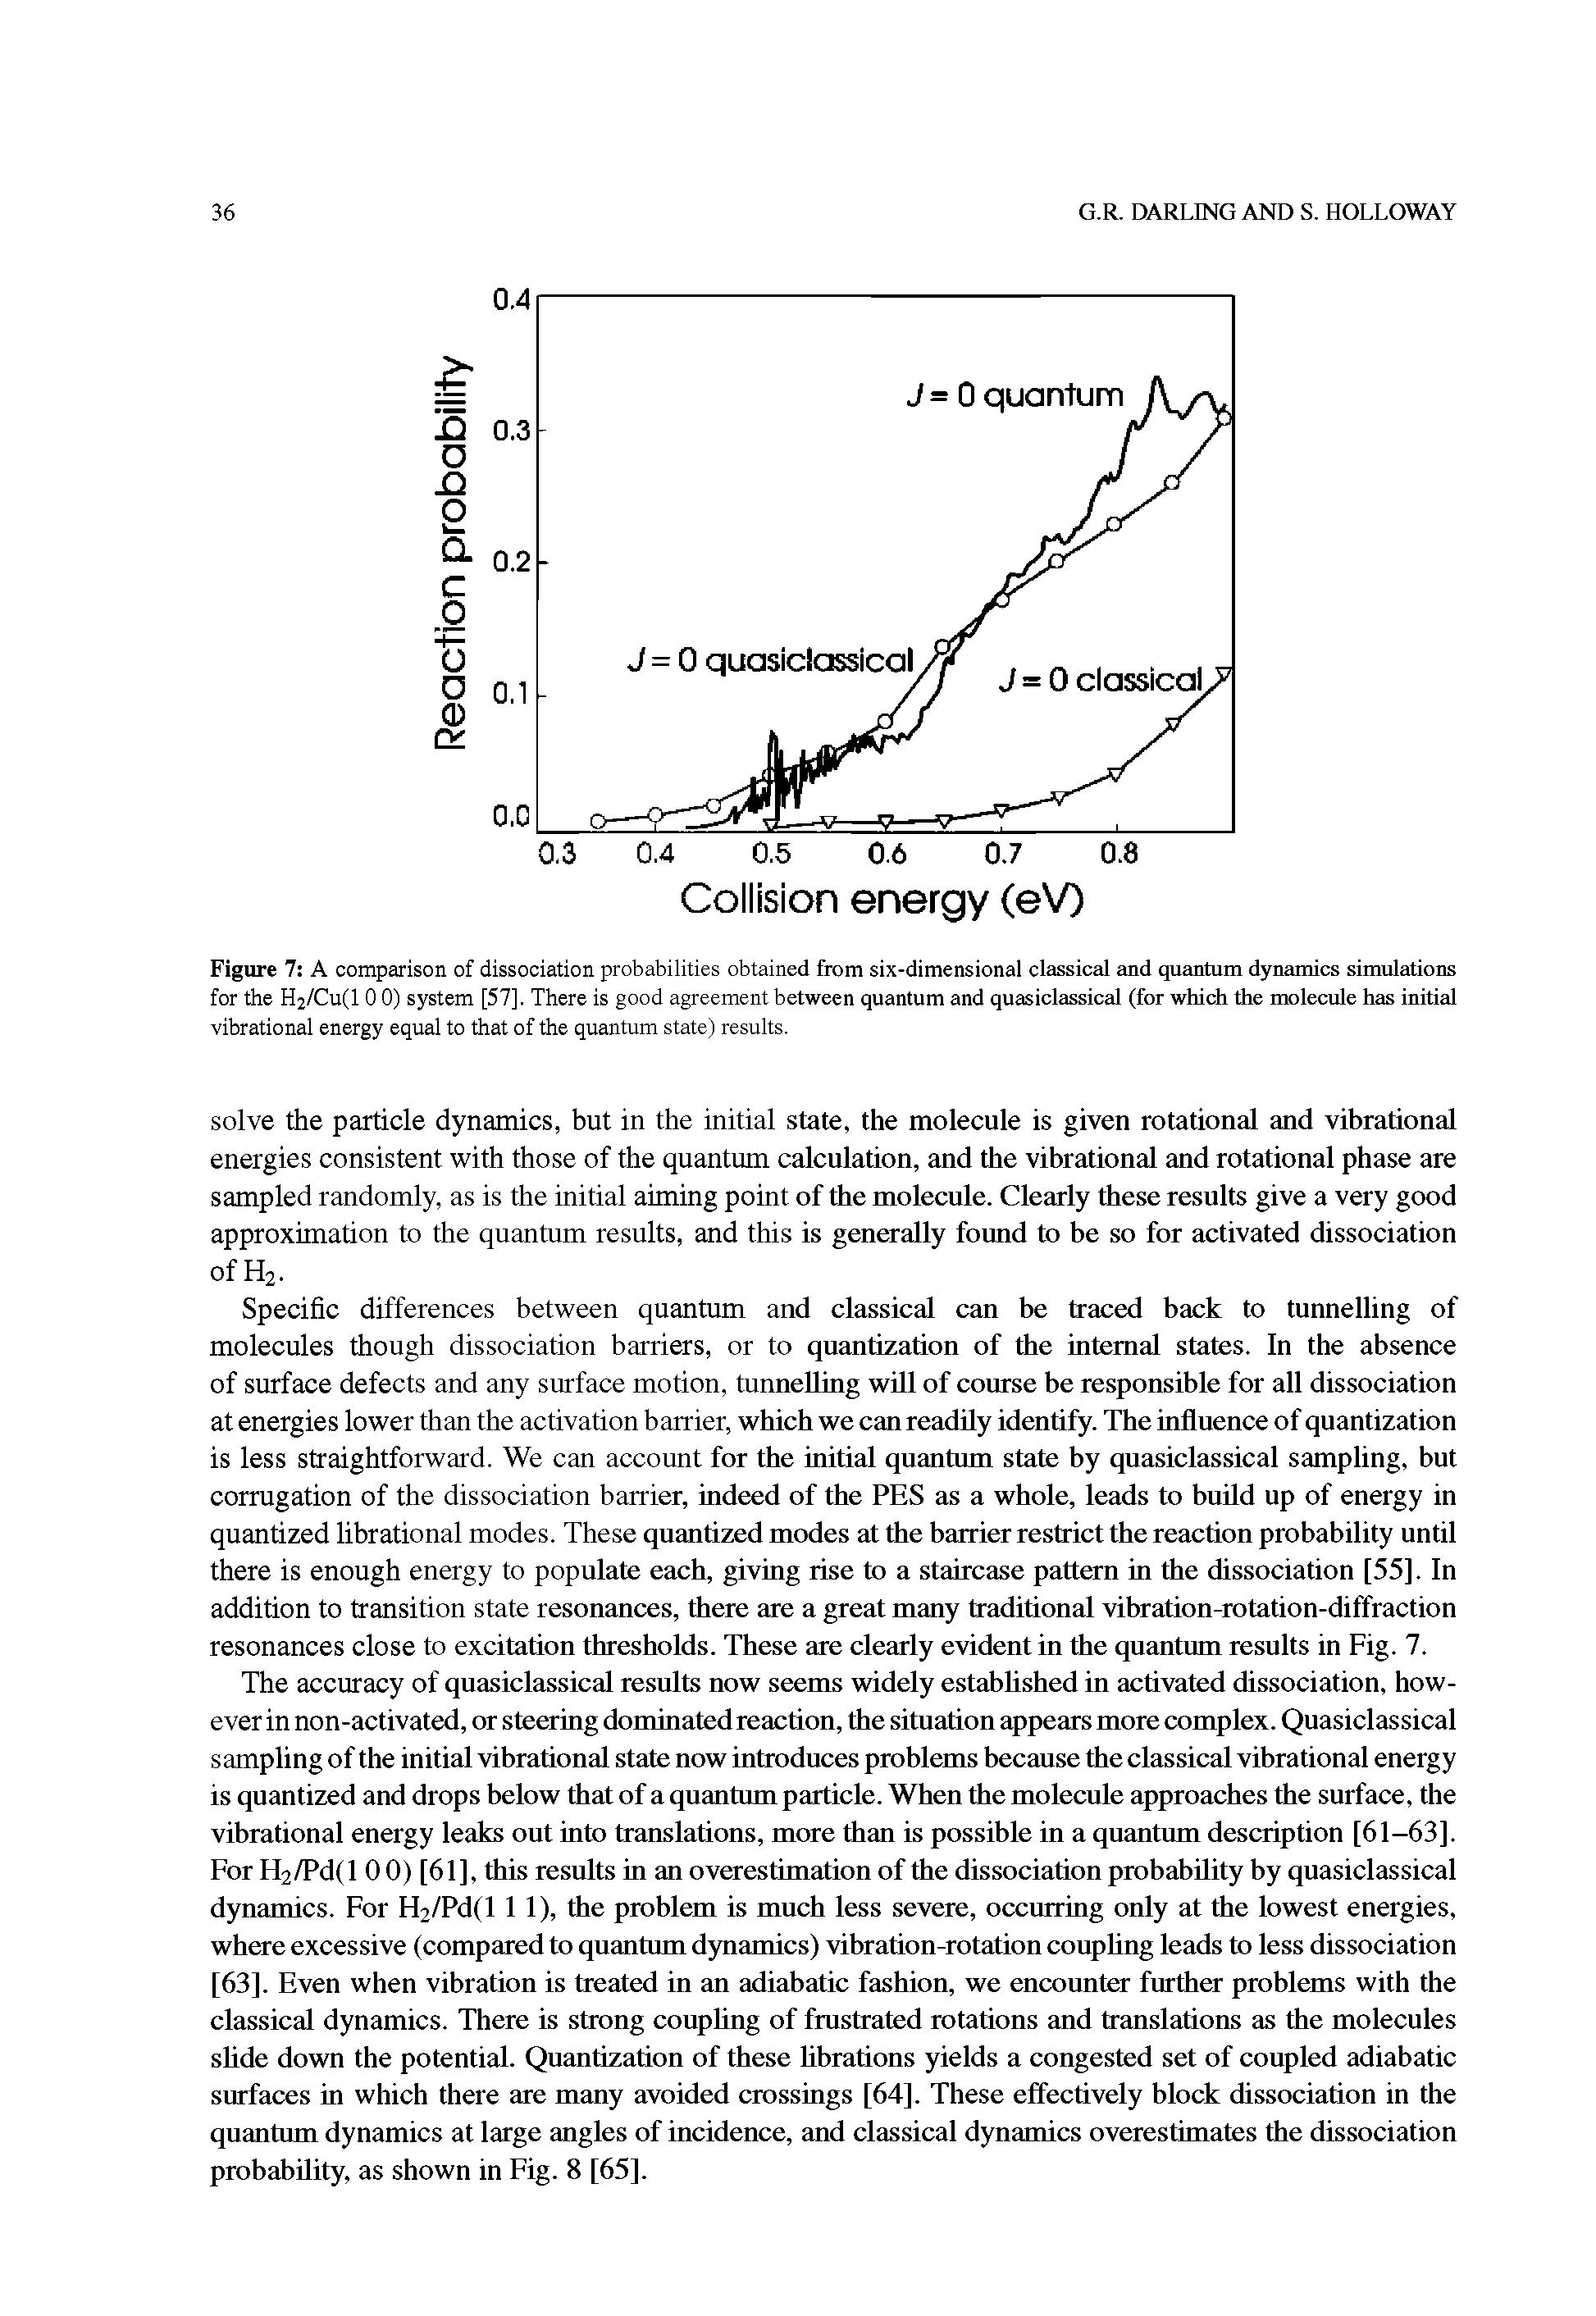 Figure 7 A comparison of dissociation probabilities obtained from six-dimensional classical and quantum dynamics simulations for the H2/Cu(l 0 0) system [57]. There is good agreement between quantum and quasiclassical (for which hie molecule has initial vibrational energy equal to that of the quantum state) results.